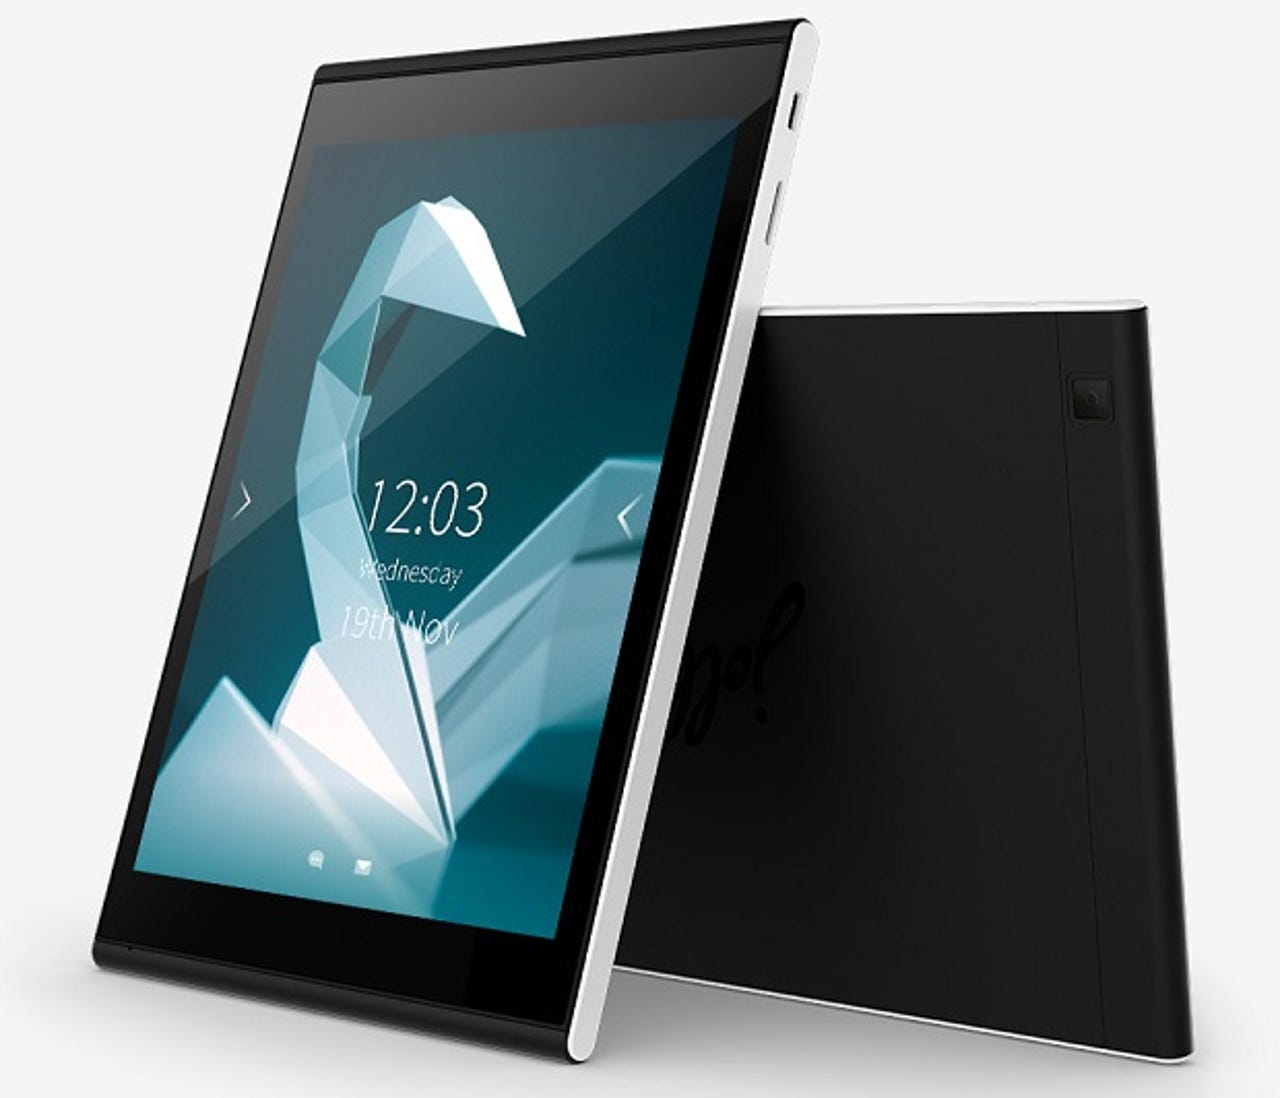 jolla-tablet-indiegogo-crowd-funded.jpg